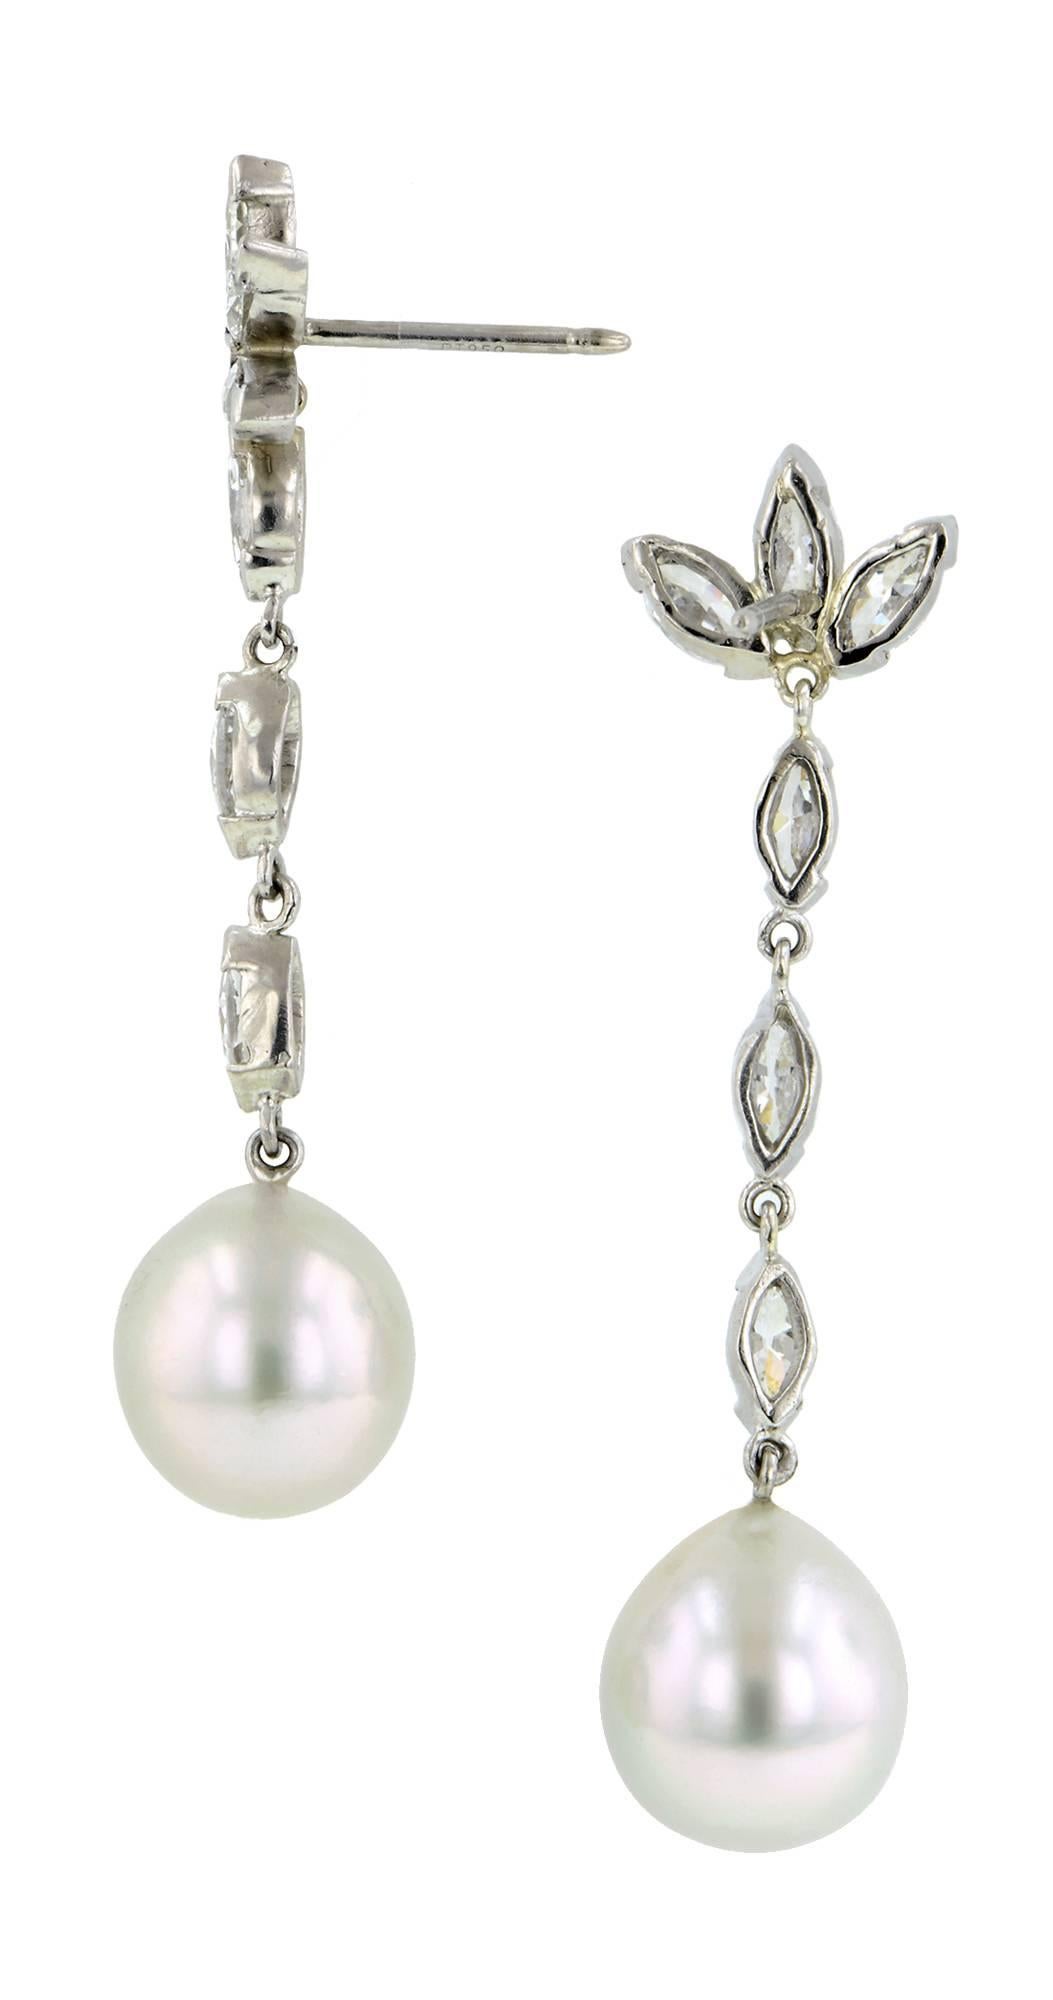 Vintage diamond & cultured pearl drop earrings featuring light gray cultured pearls measuring app. 10.3mm & 10.5mm, suspended from Marquise cut diamonds, all weighing app. 2.30ctw., fashioned in platinum. Last quarter 20th century. Length 1 3/4